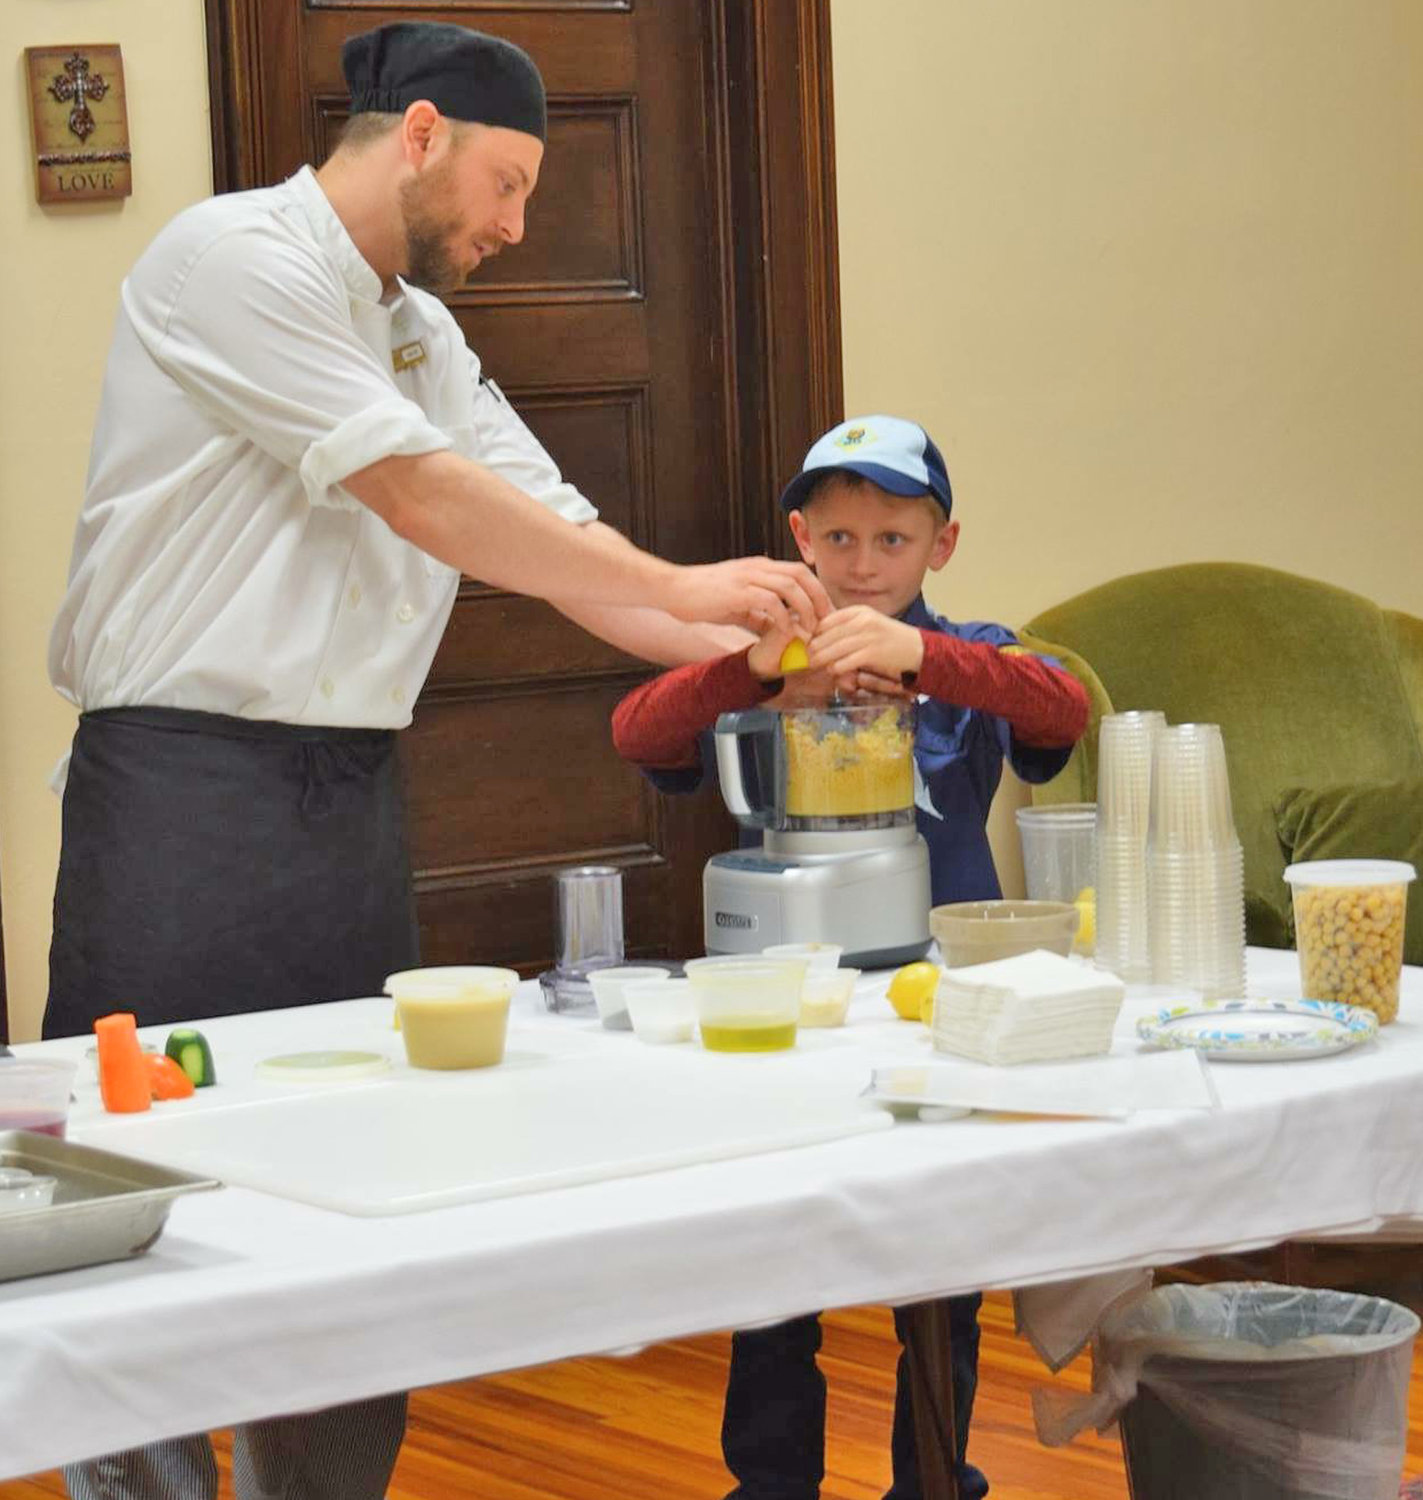 MIXING THINGS UP — Chef Steve Loson from Bon Appetit at Hamilton College and Bear Scout Brandon Tuttle prepare hummus in a food processor during a recent demonstration held in Rome about healthy eating.